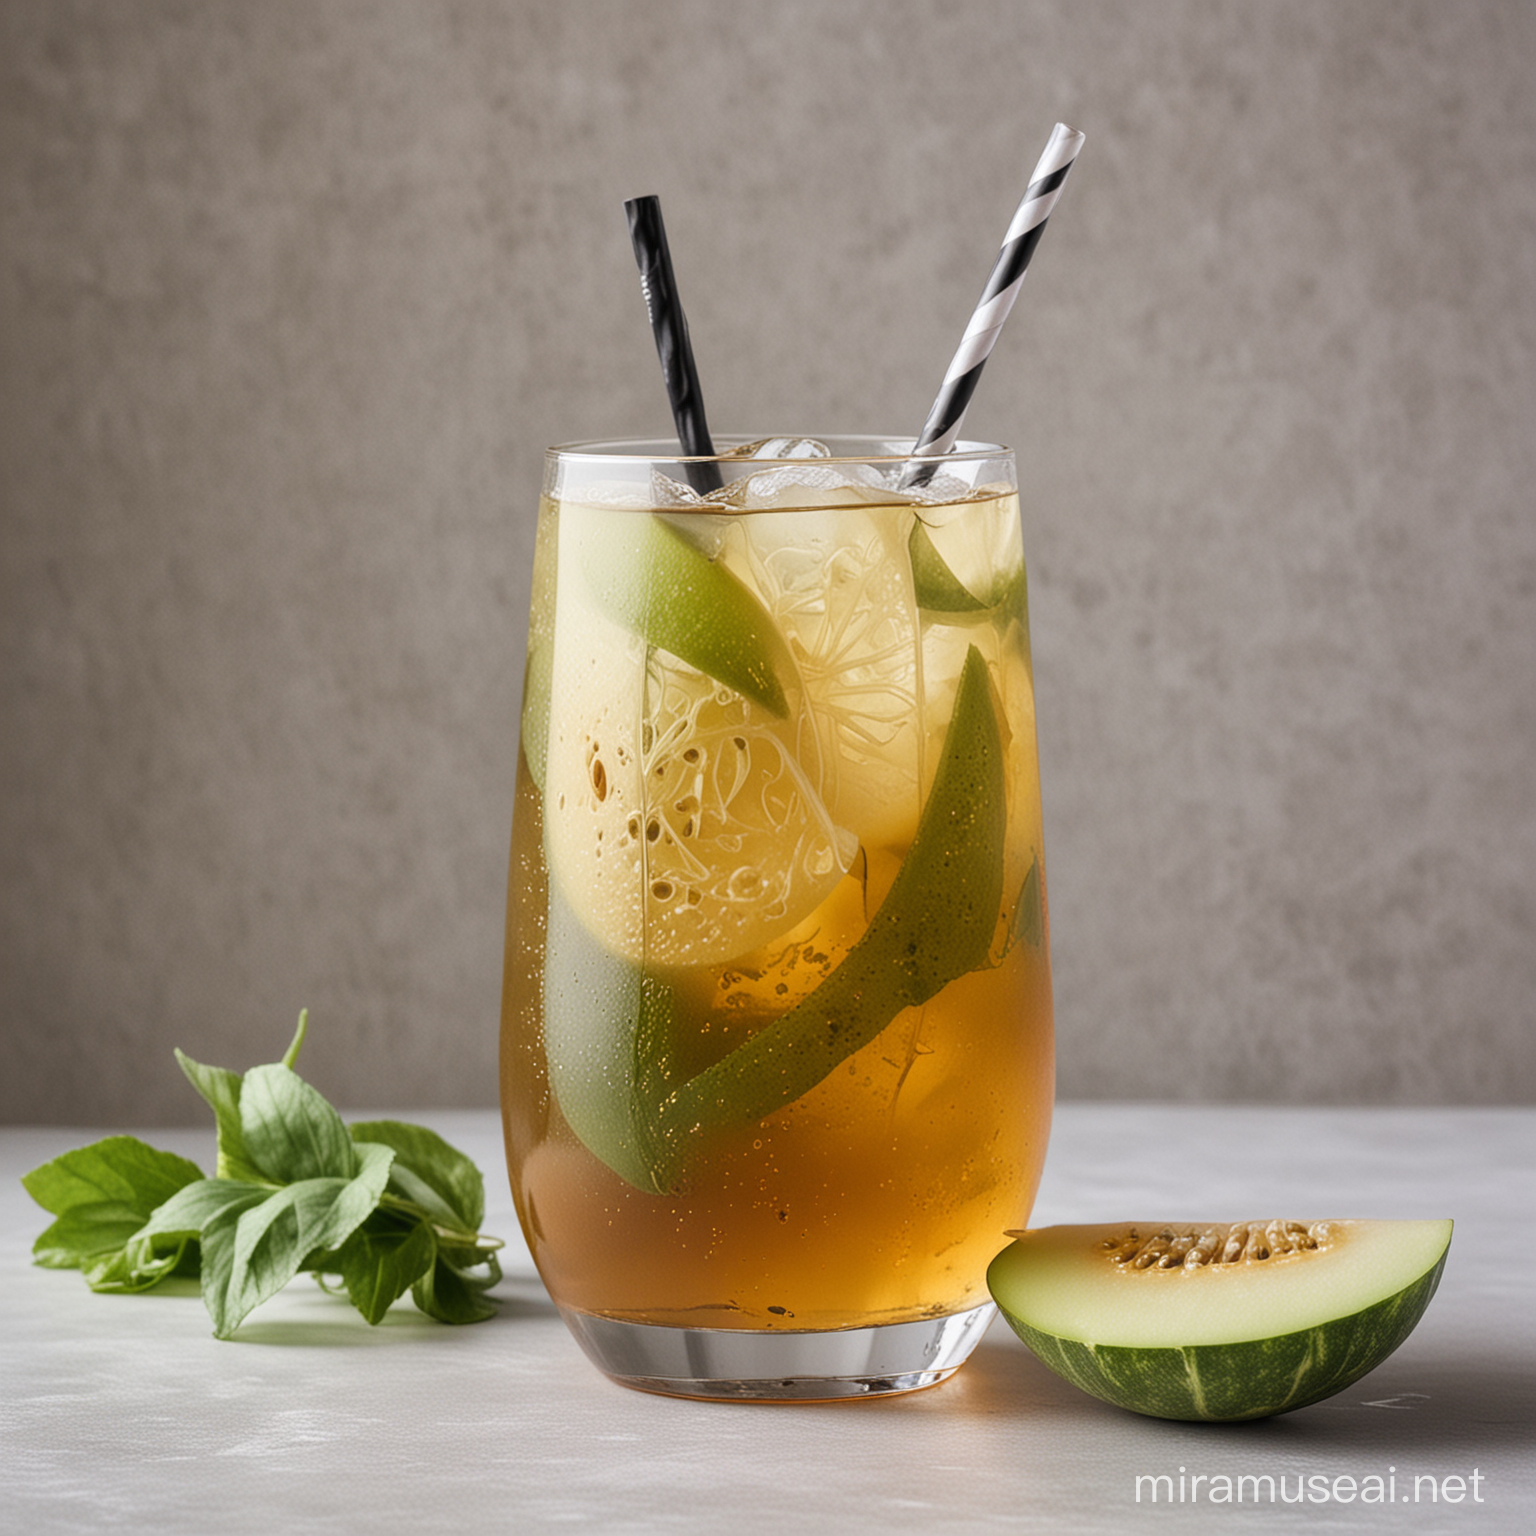 Refreshing Winter Melon Iced Tea with Lemon Slices and Mint Leaves